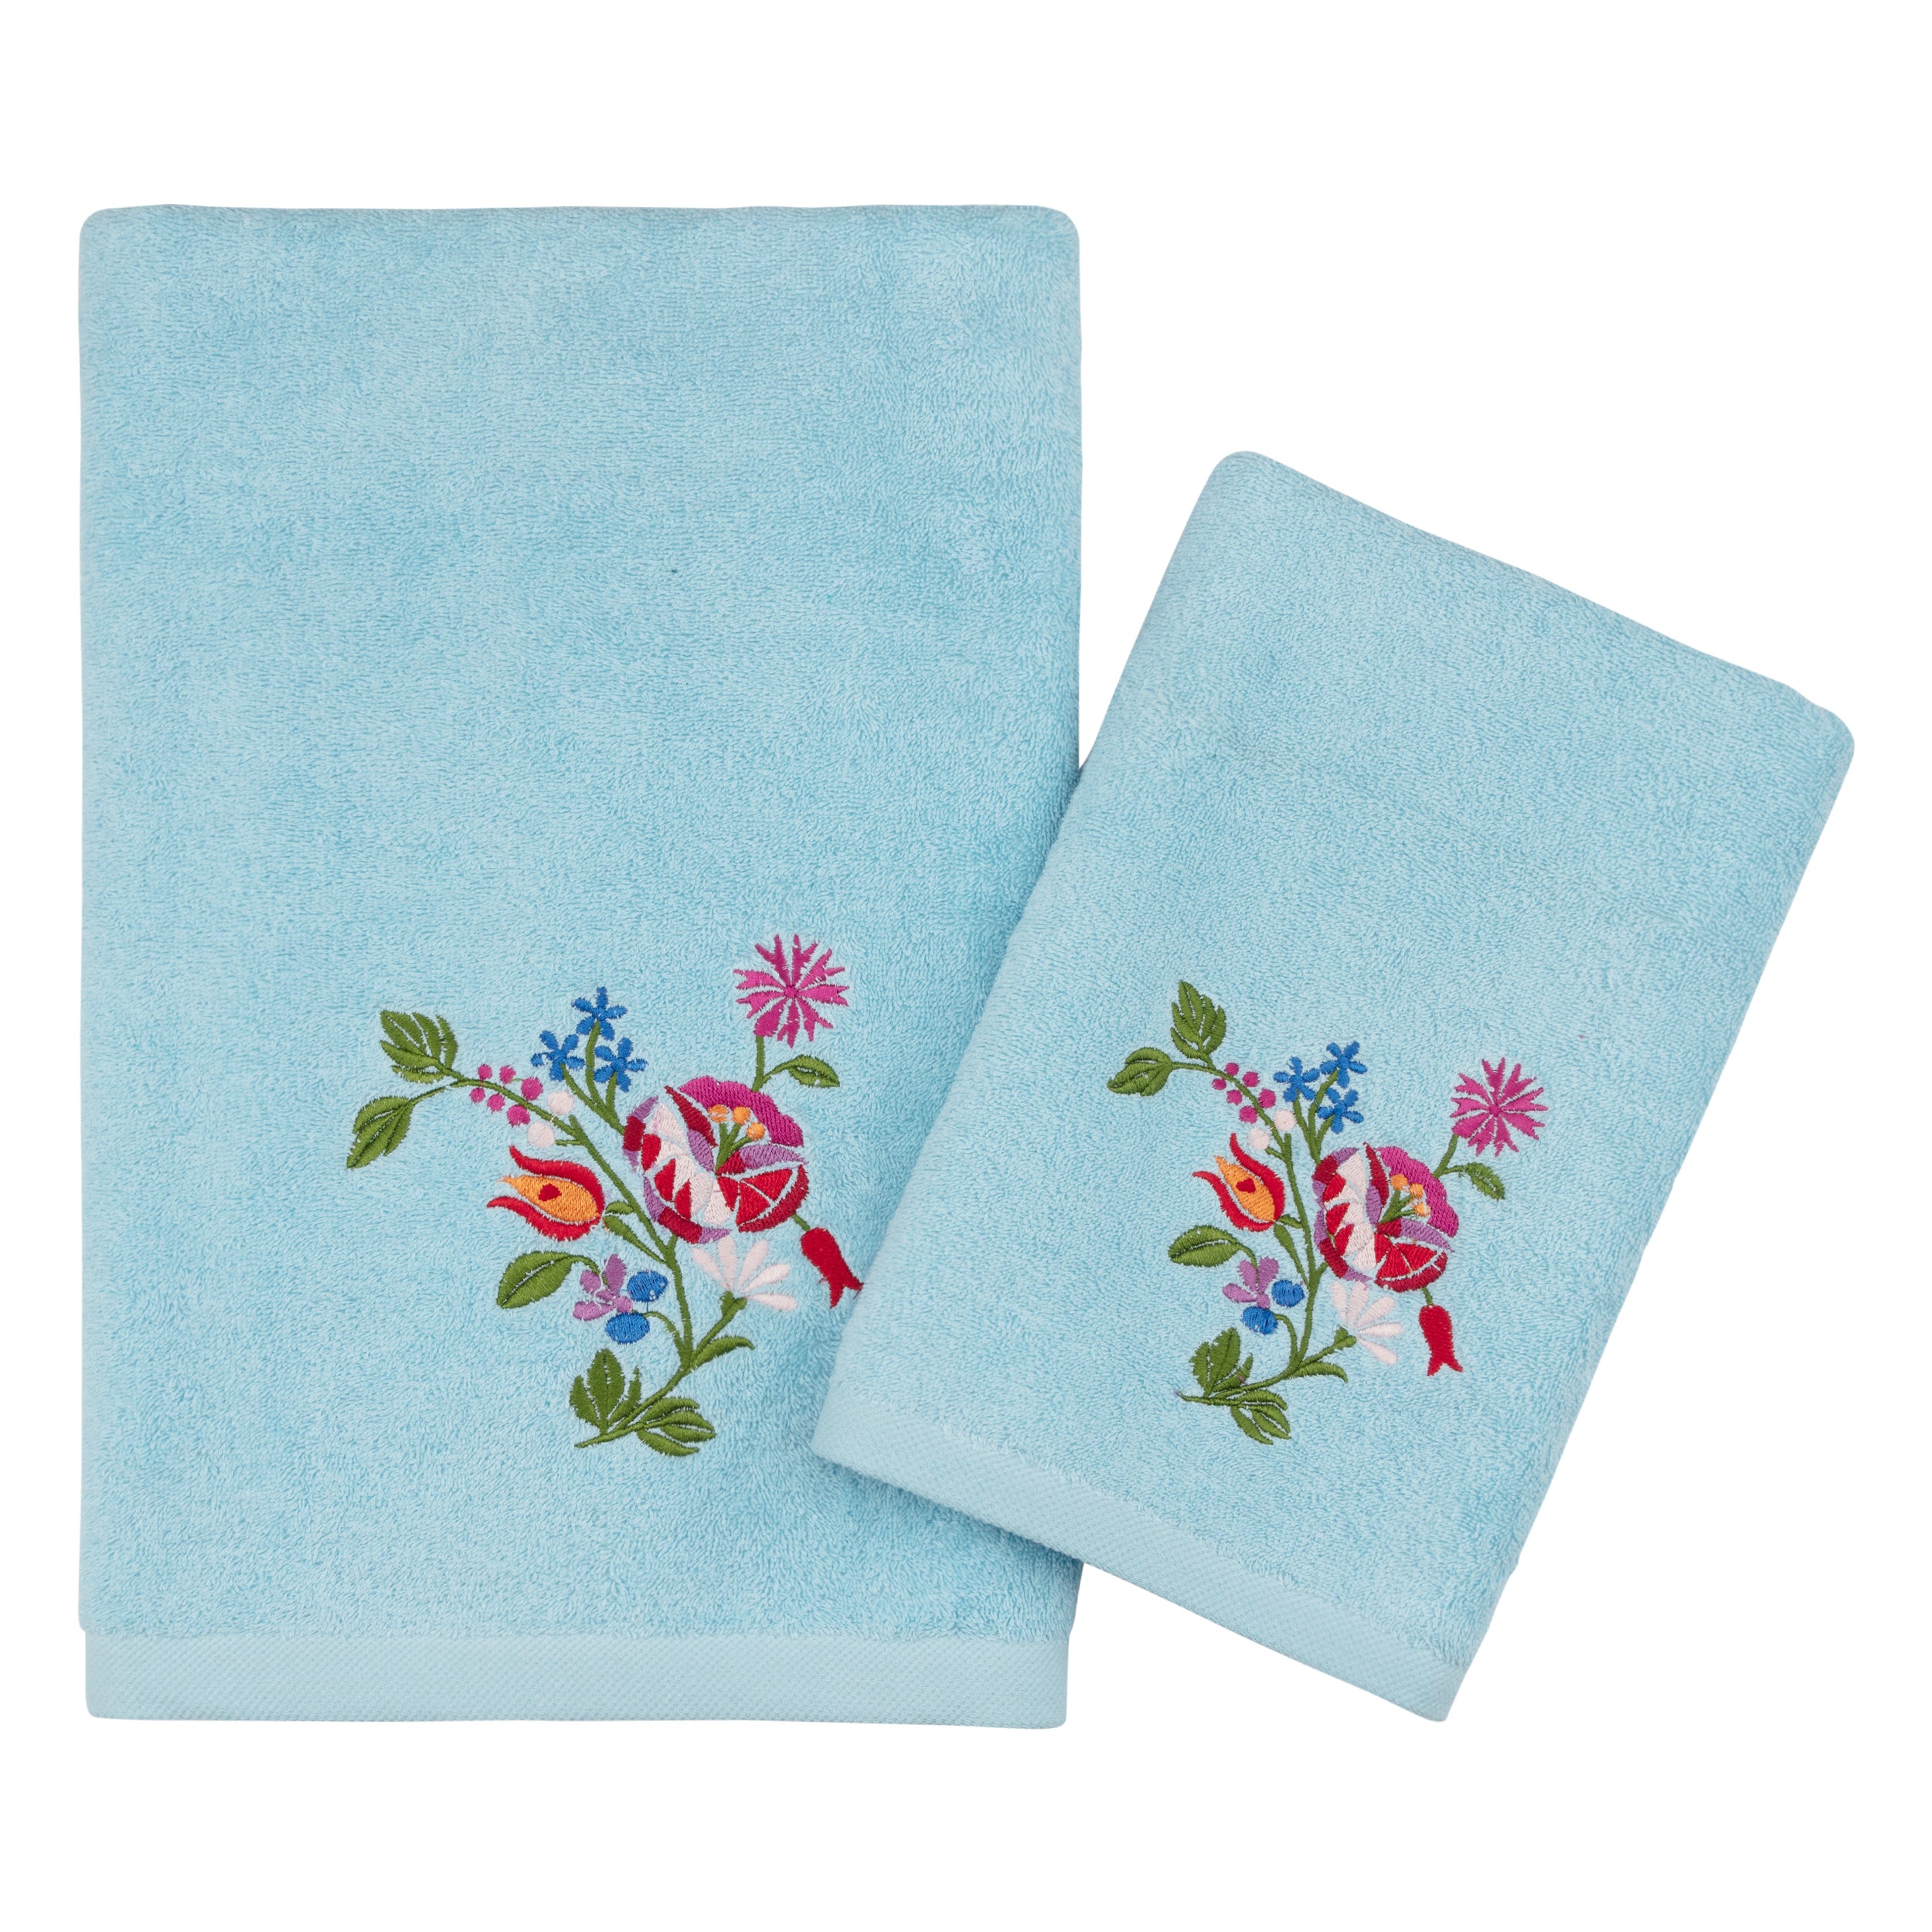 HAND TOWEL (EMBROIDERED) — Shoppineapple